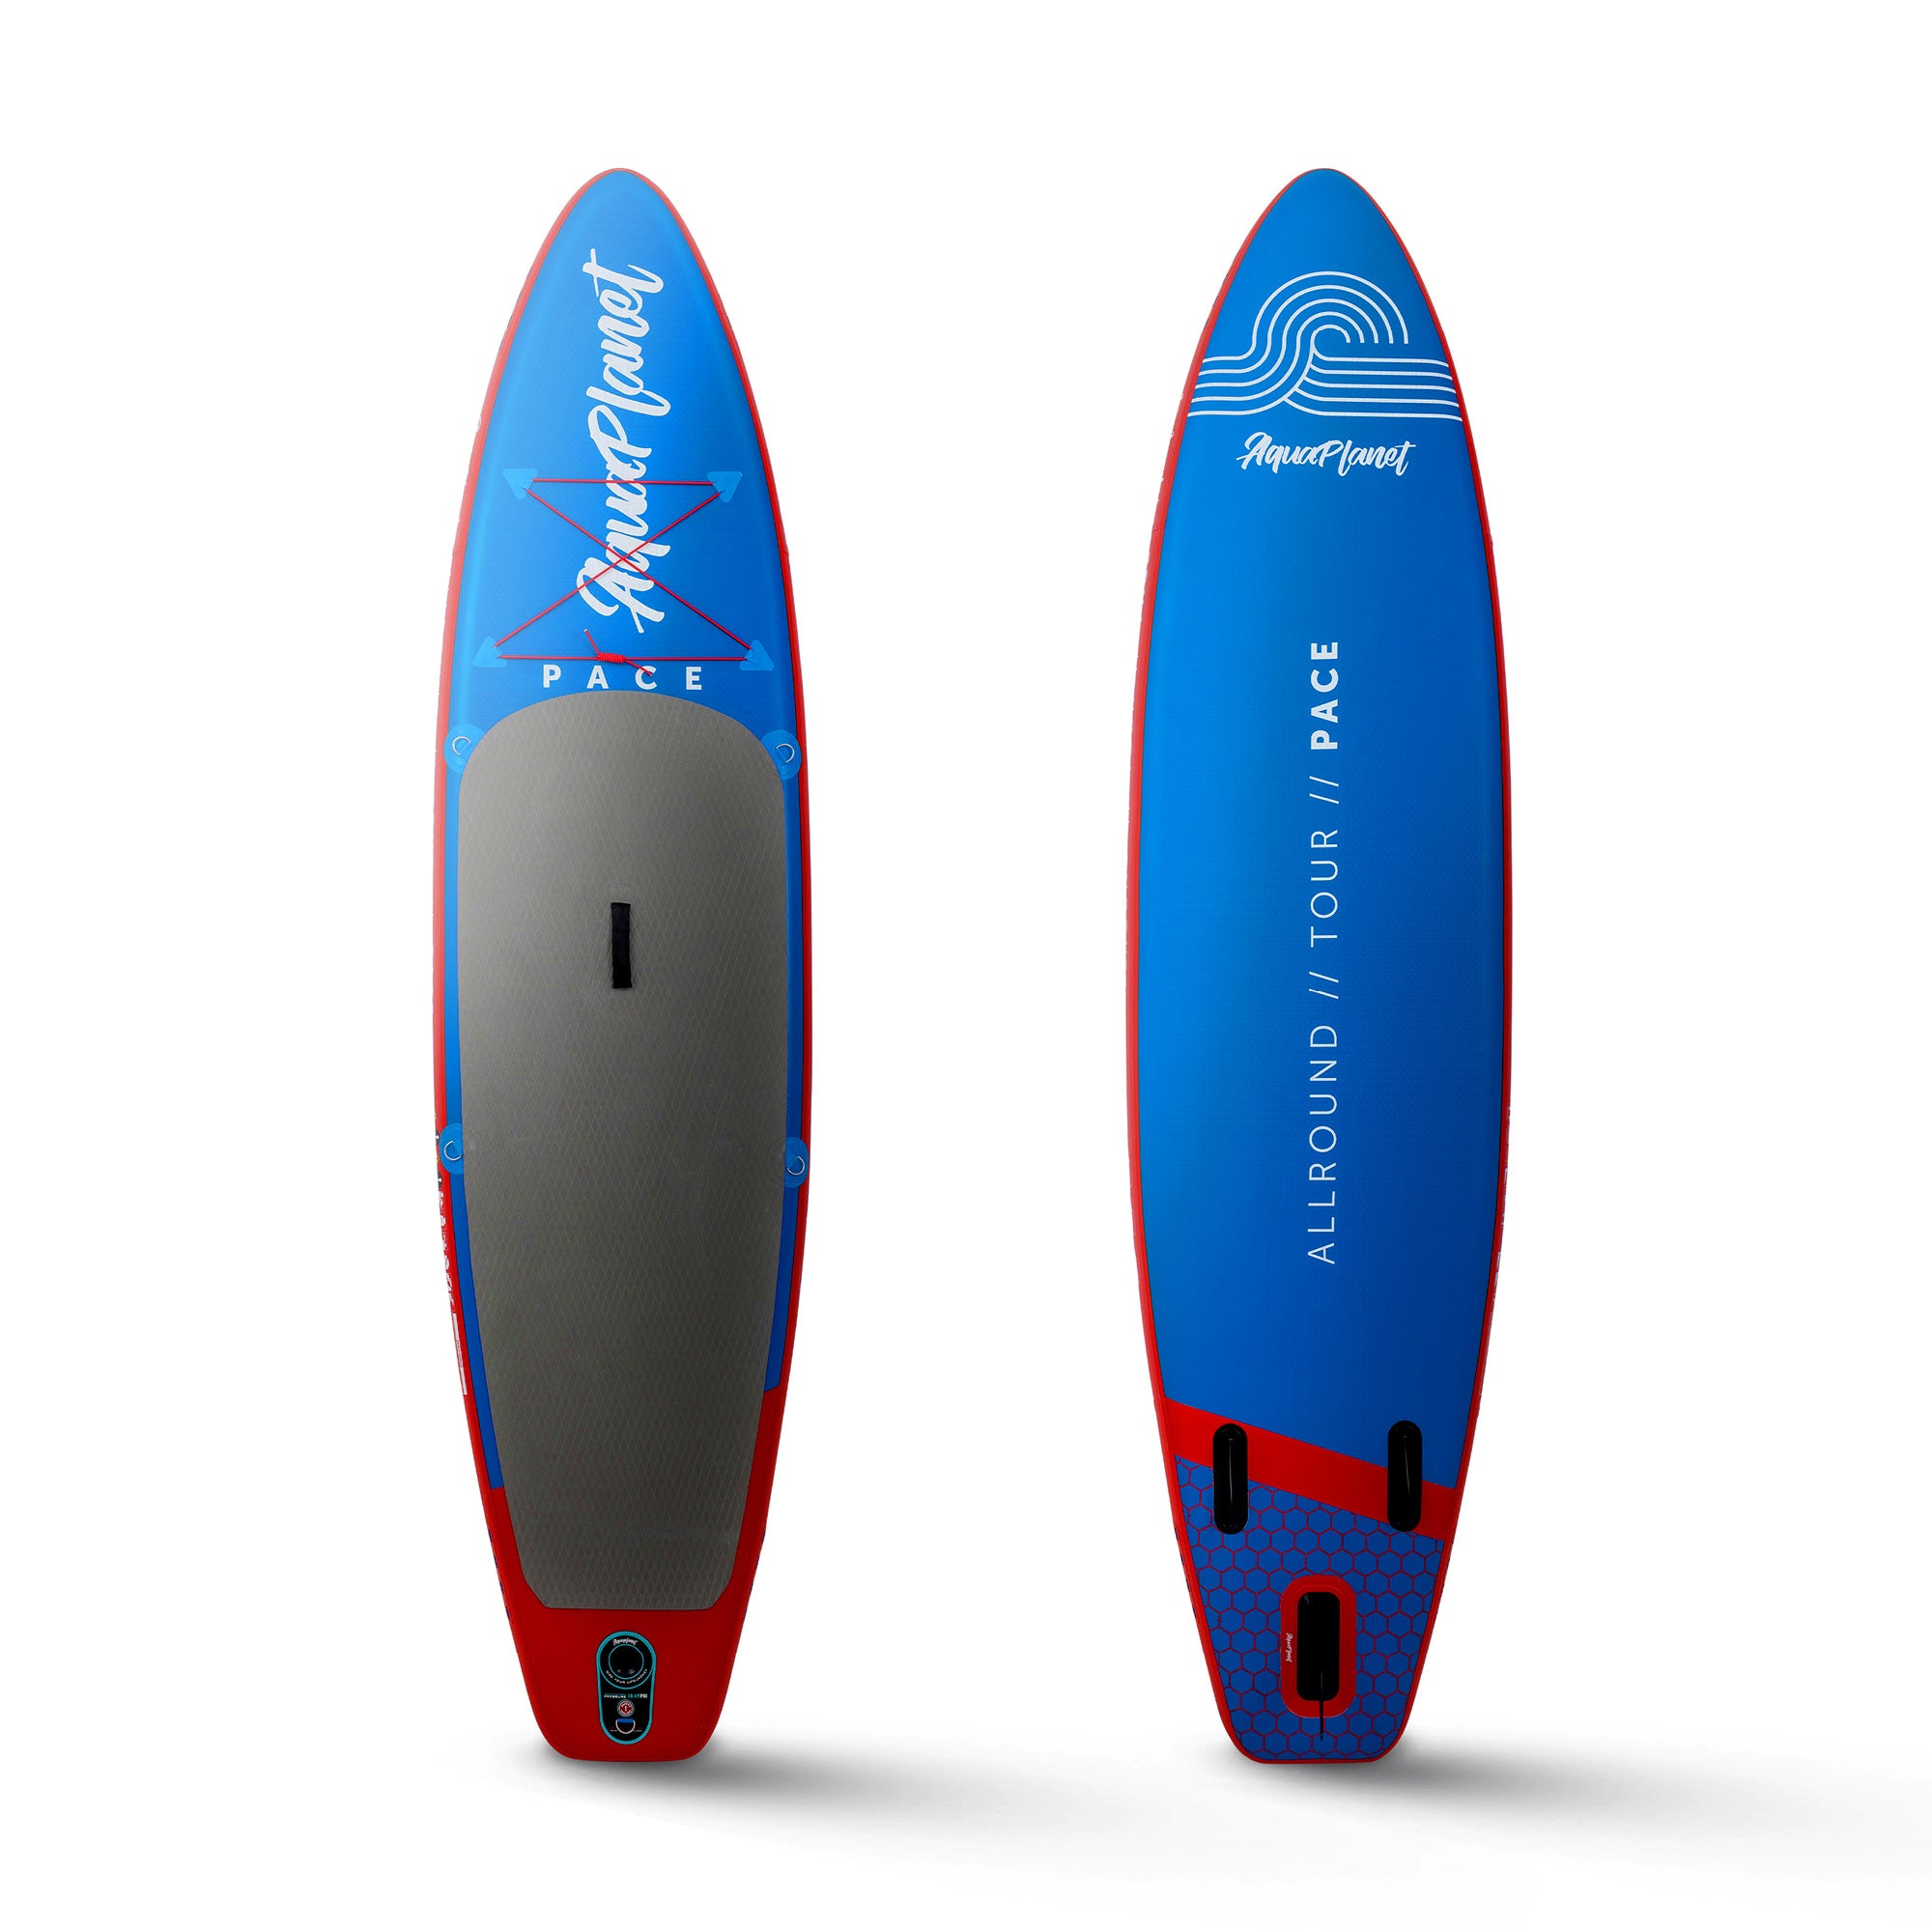 Aquaplanet Pace 10'6" iSUP Inflatable Stand Up Paddleboard Set